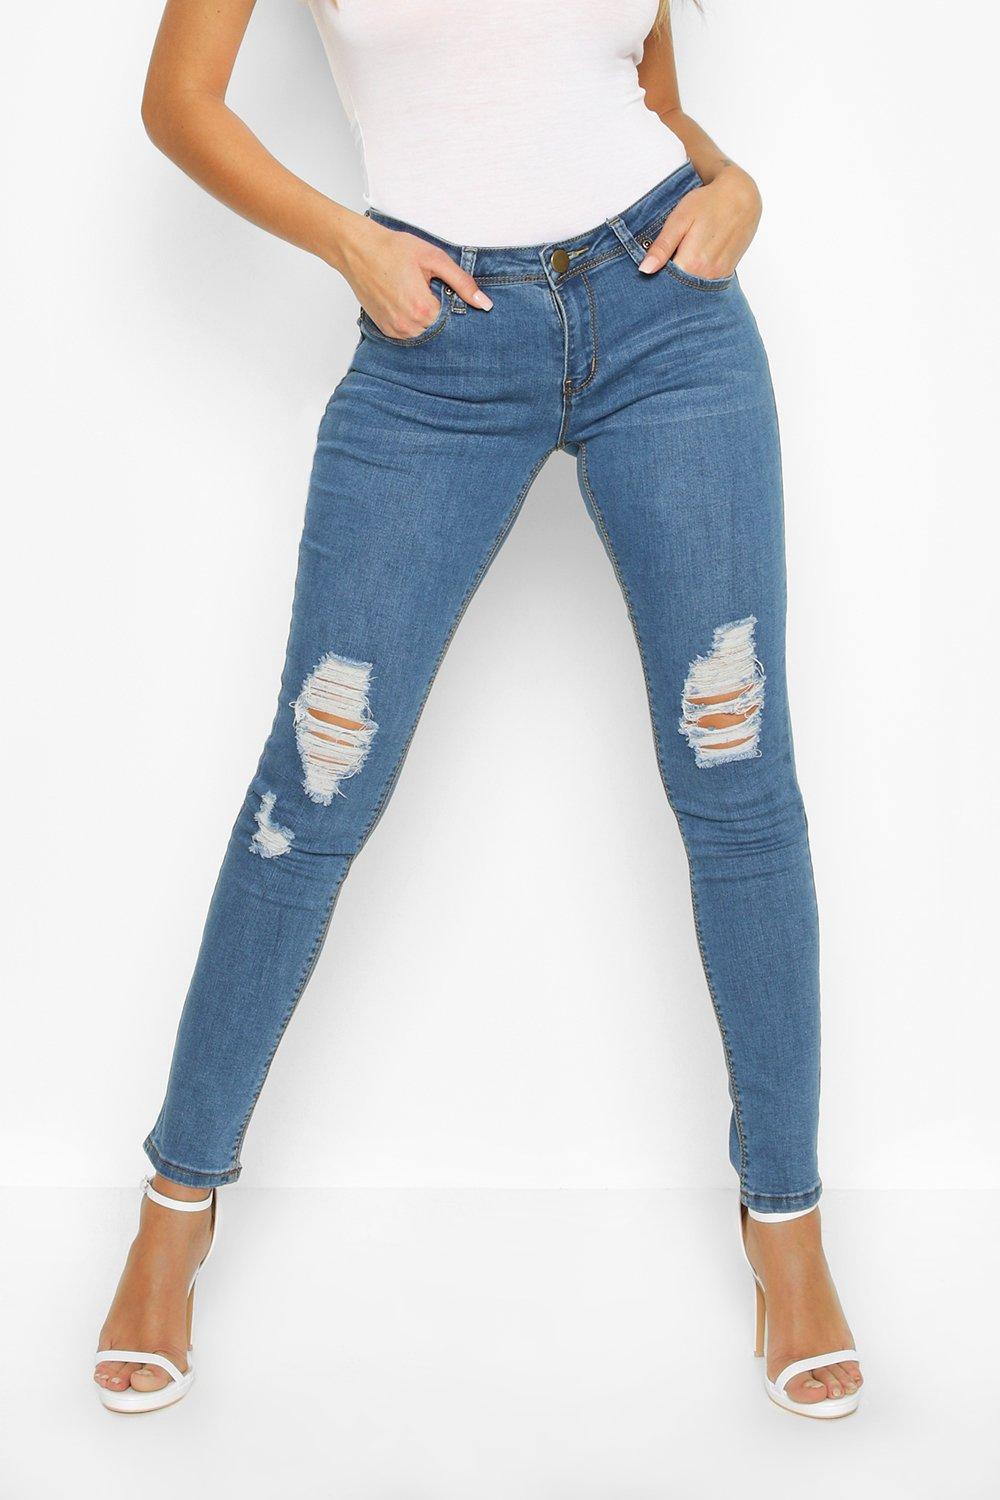 low rise skinny ripped jeans